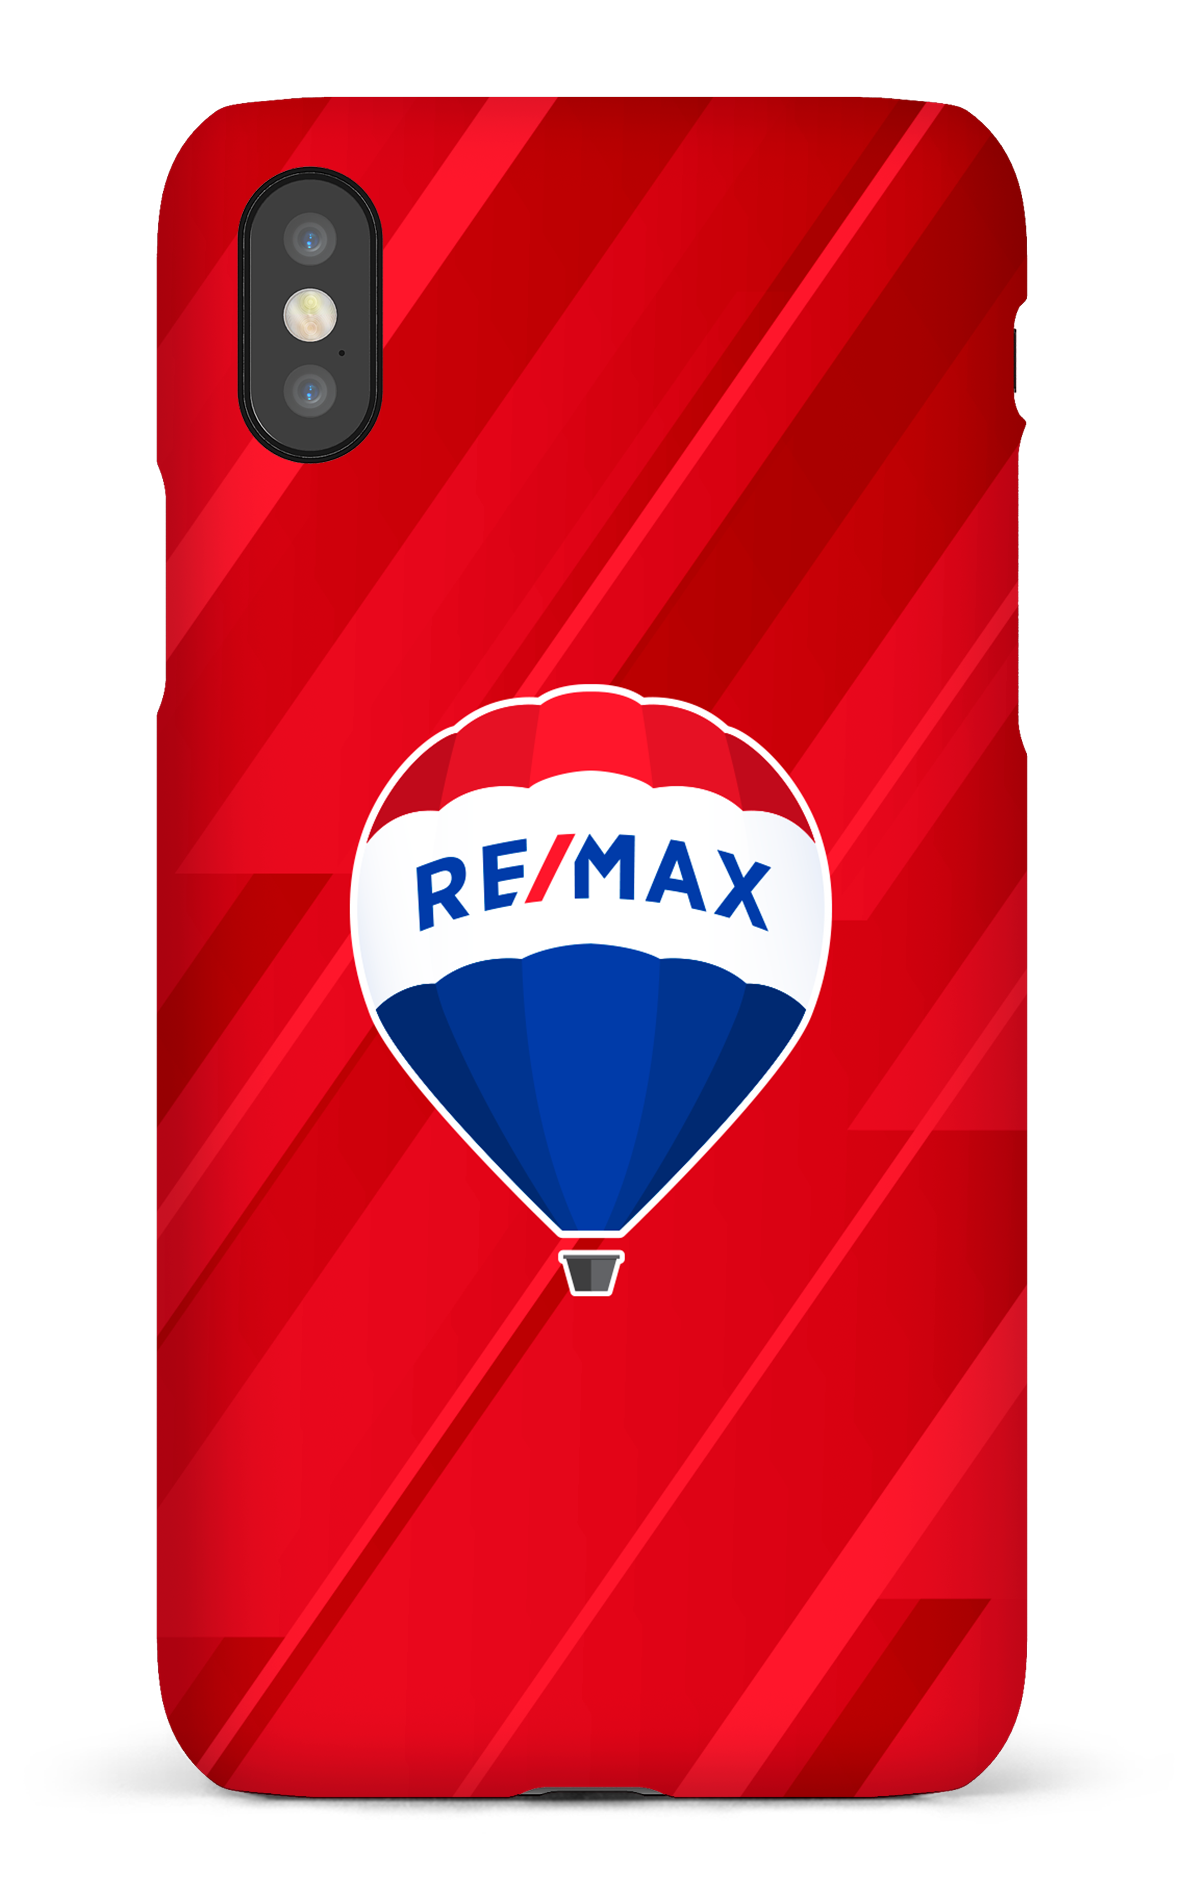 Remax Rouge - iPhone X/Xs